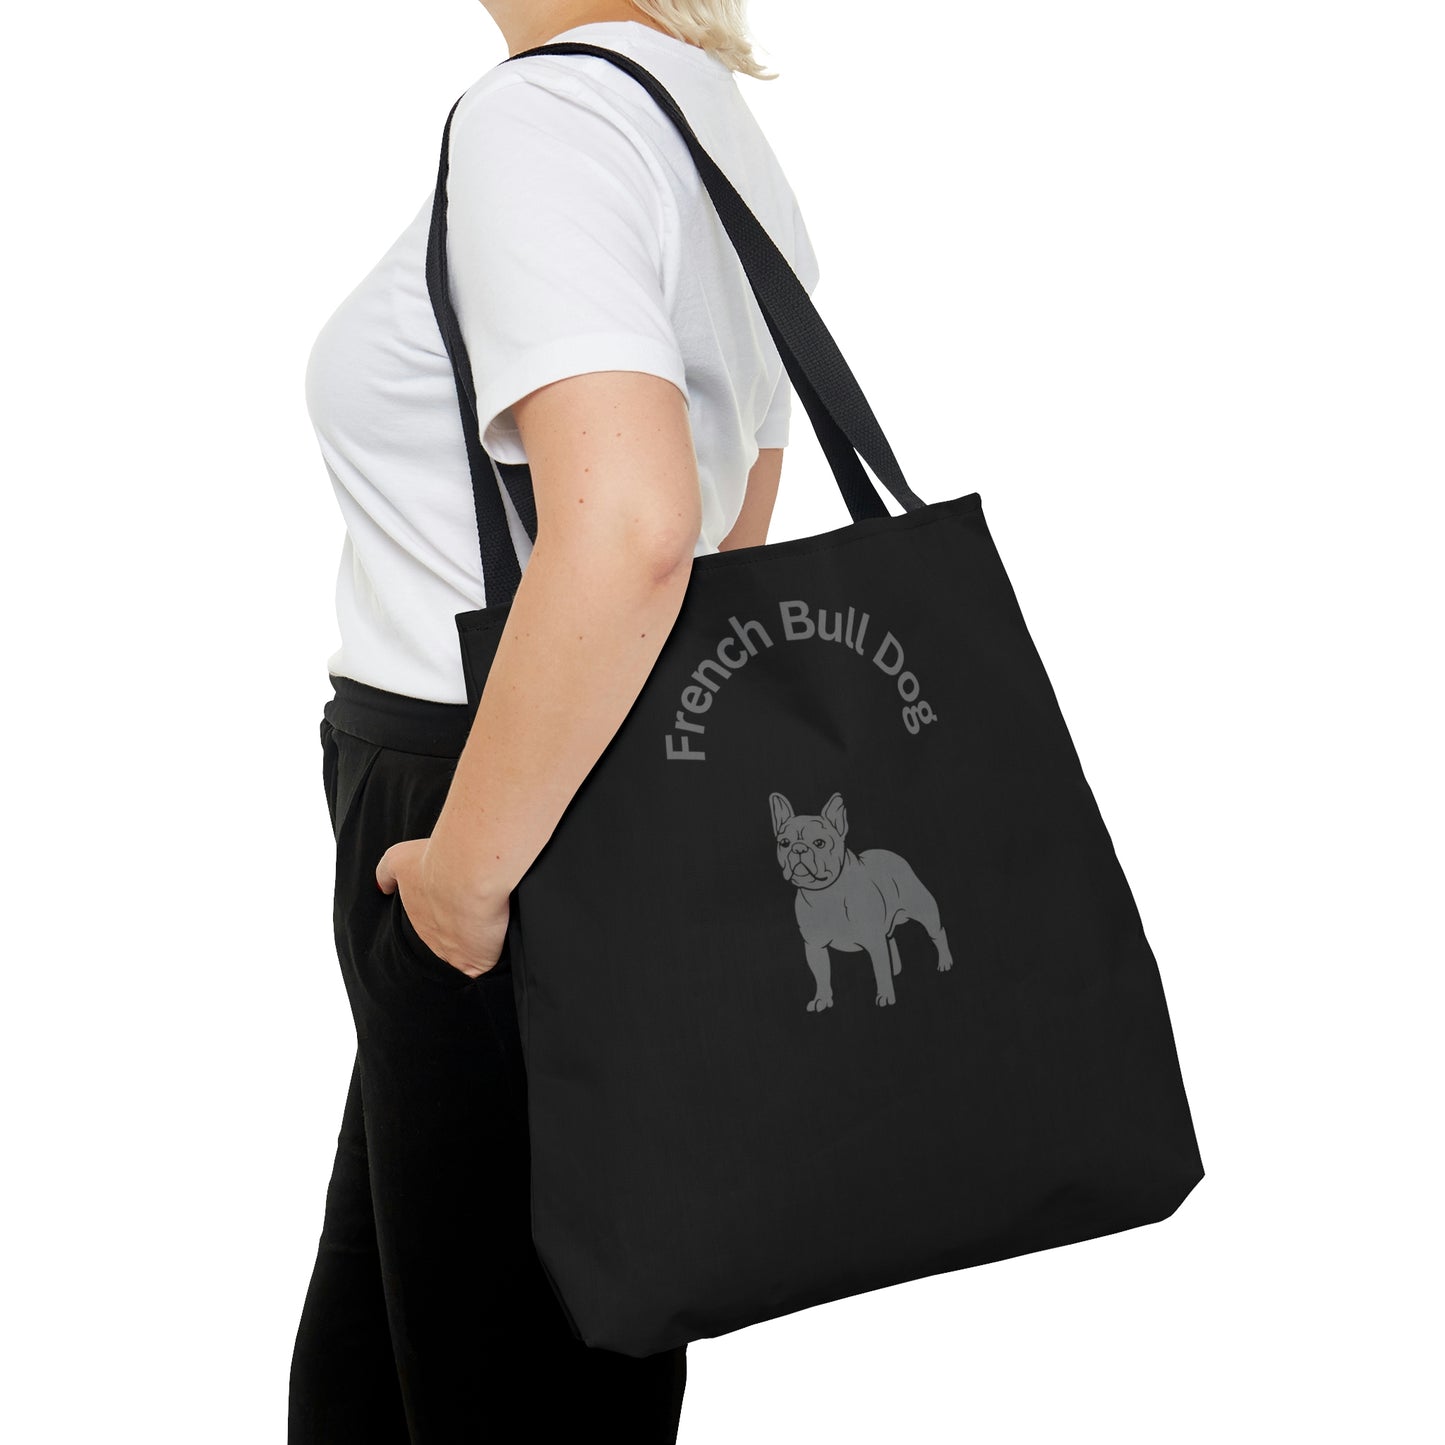 Frenchie Black AOP Tote Bag | BKLA | Shoes & Accessories | shoes, hats, phone covers, tote bags, clutch bags